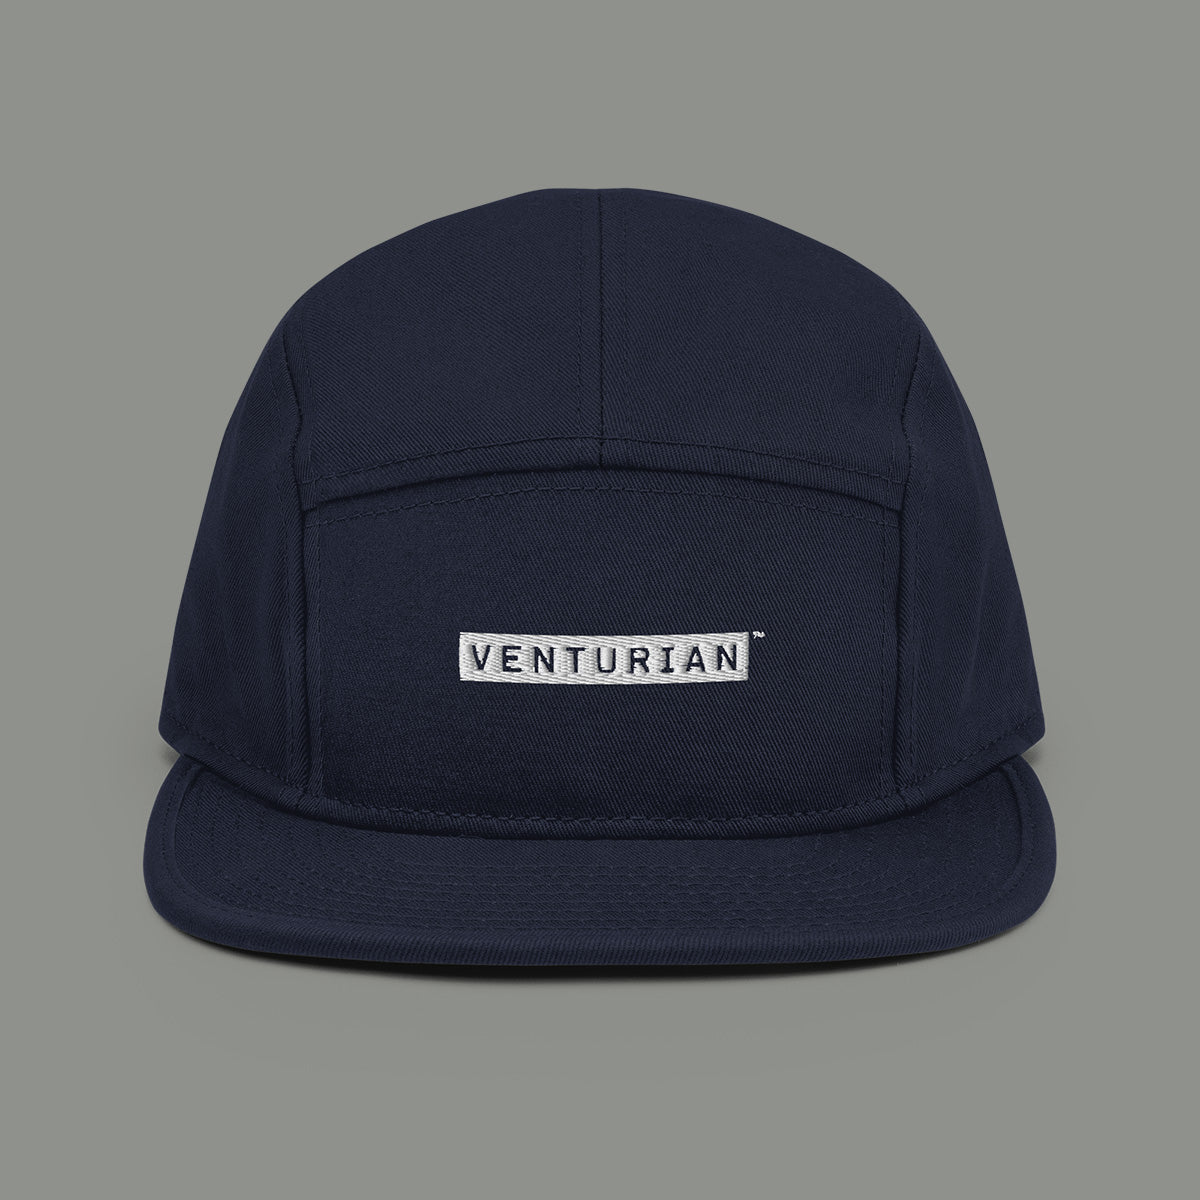 The inimitable Venturian WatchWorks 5 panel camper hat in black, gray and navy. Get yours today.